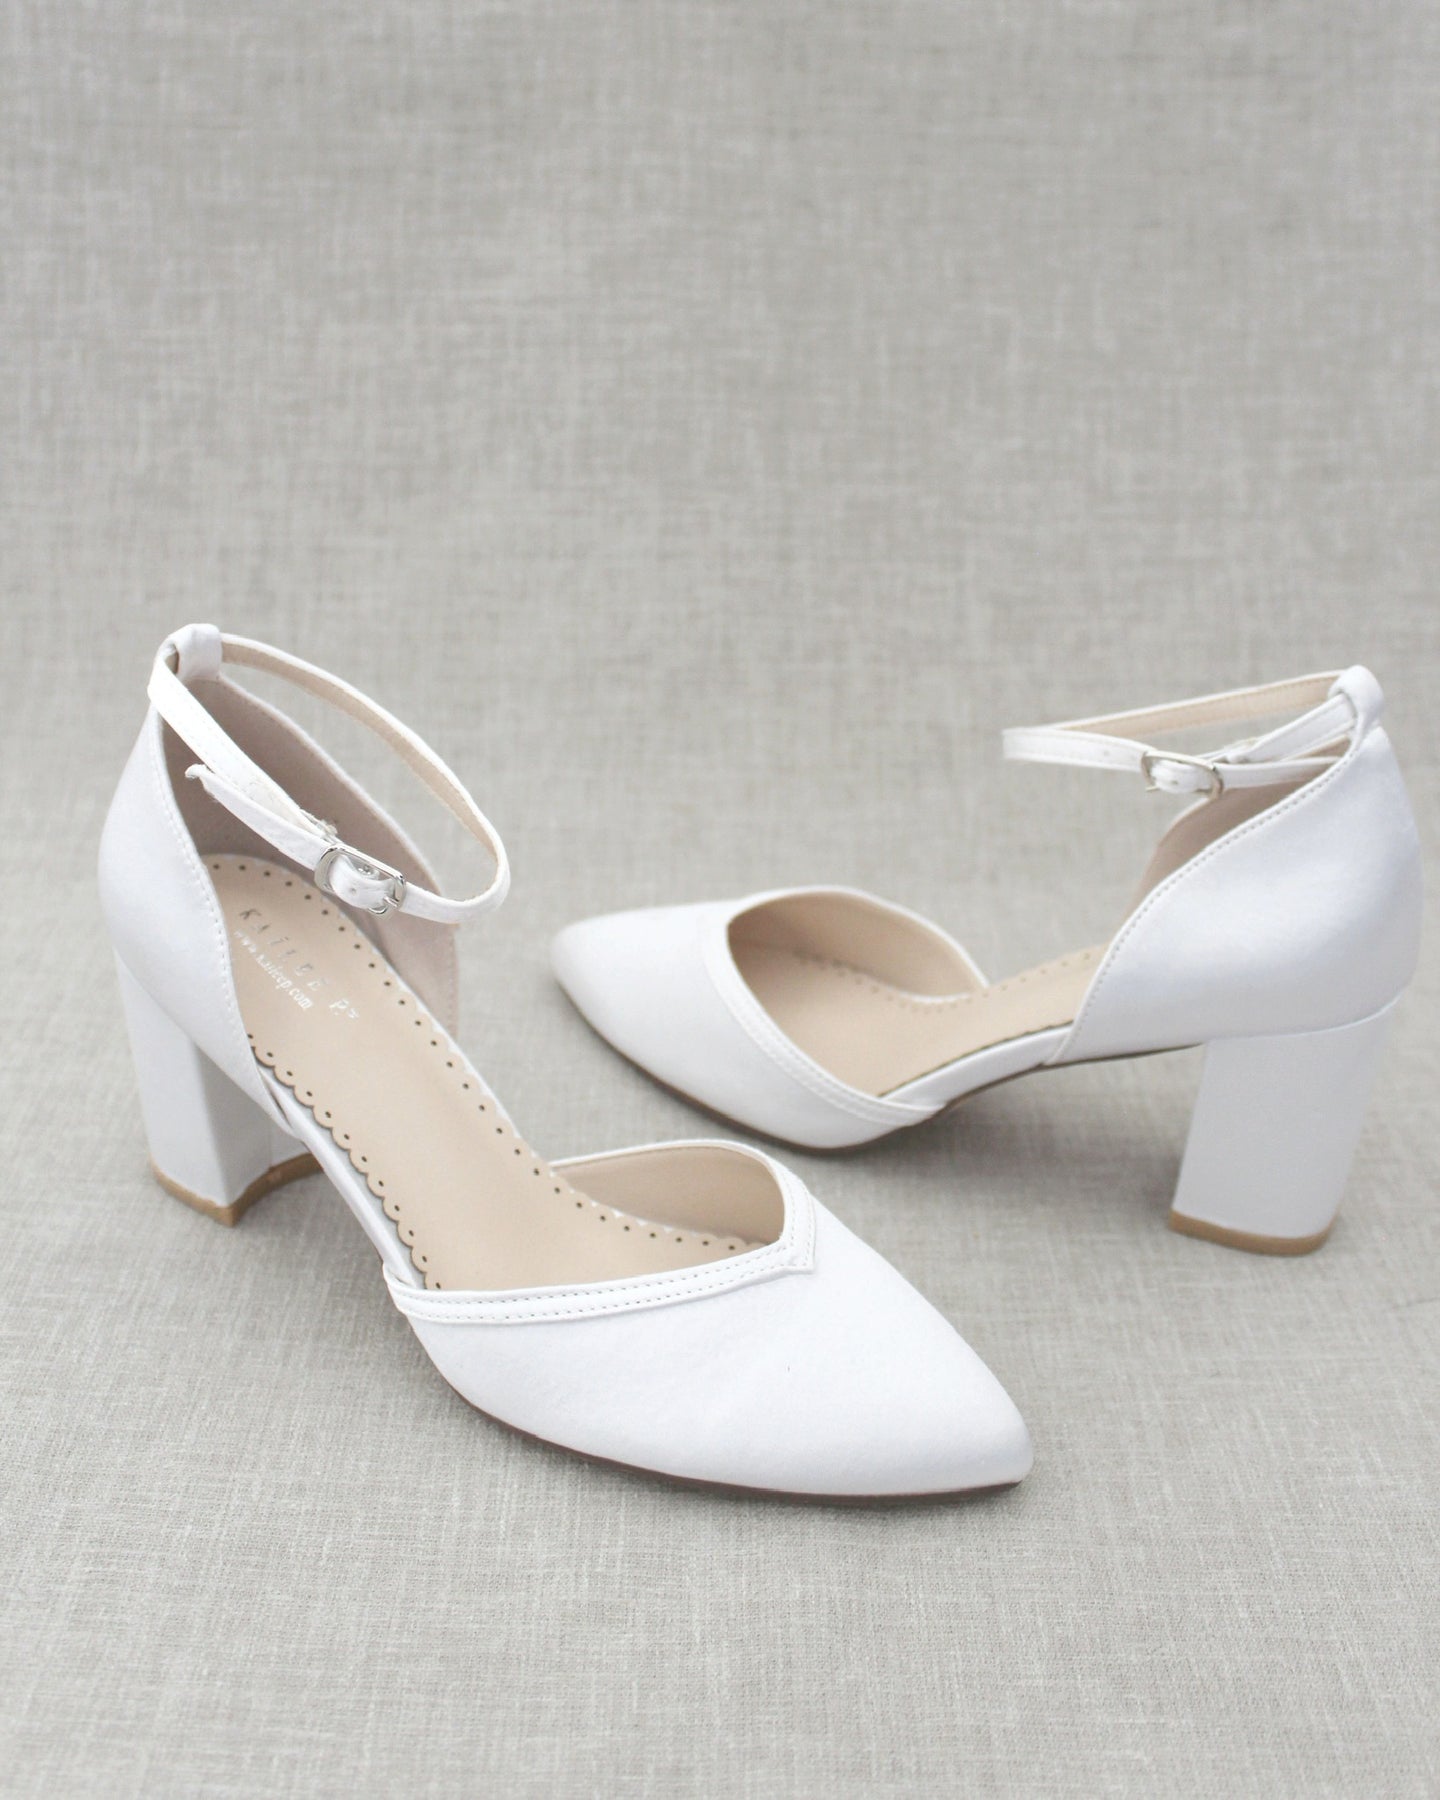 Pointed Toe Satin Block Heels with Crystal Strap